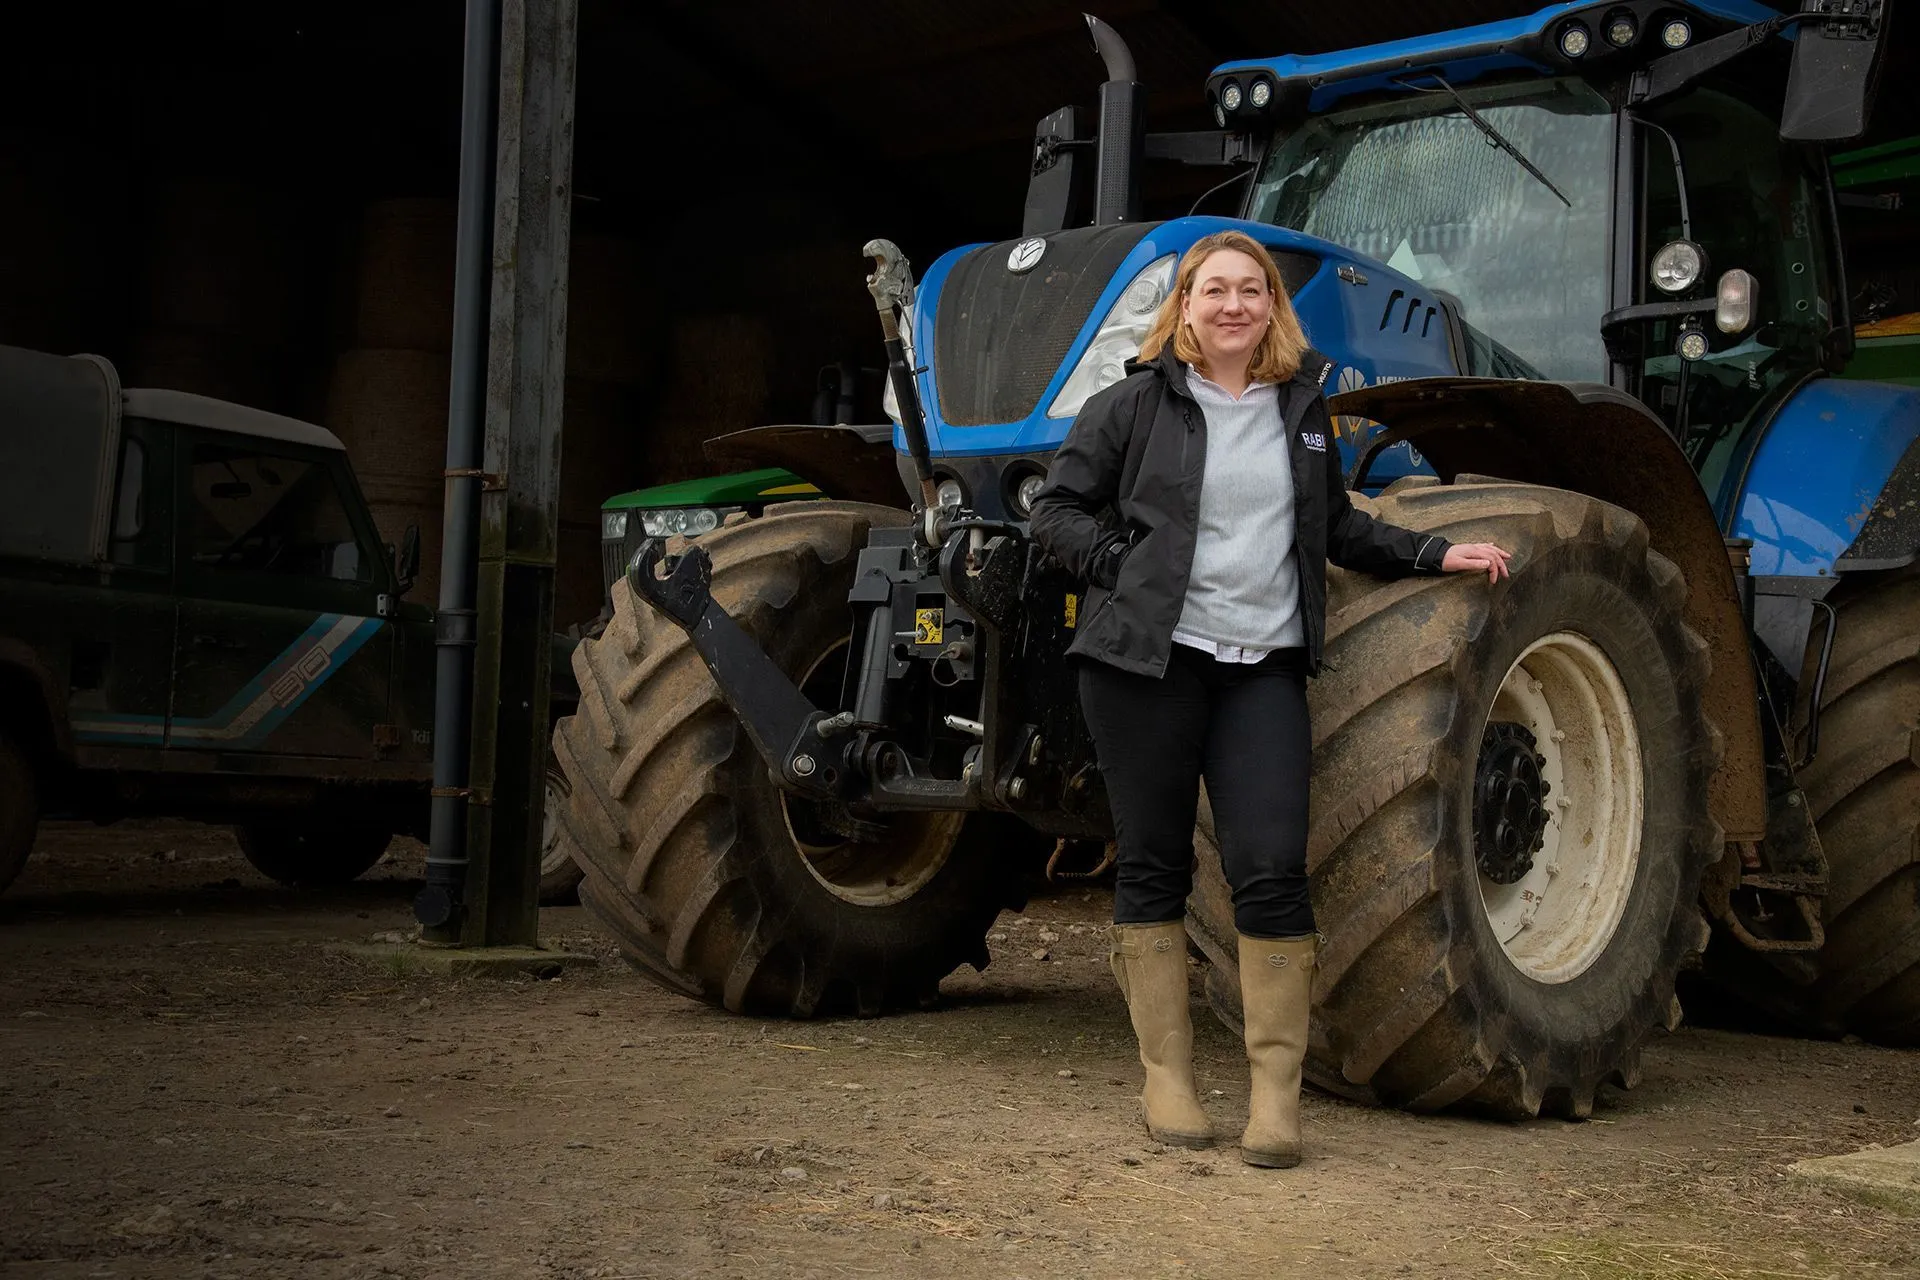 Suzy Deeley and blue tractor